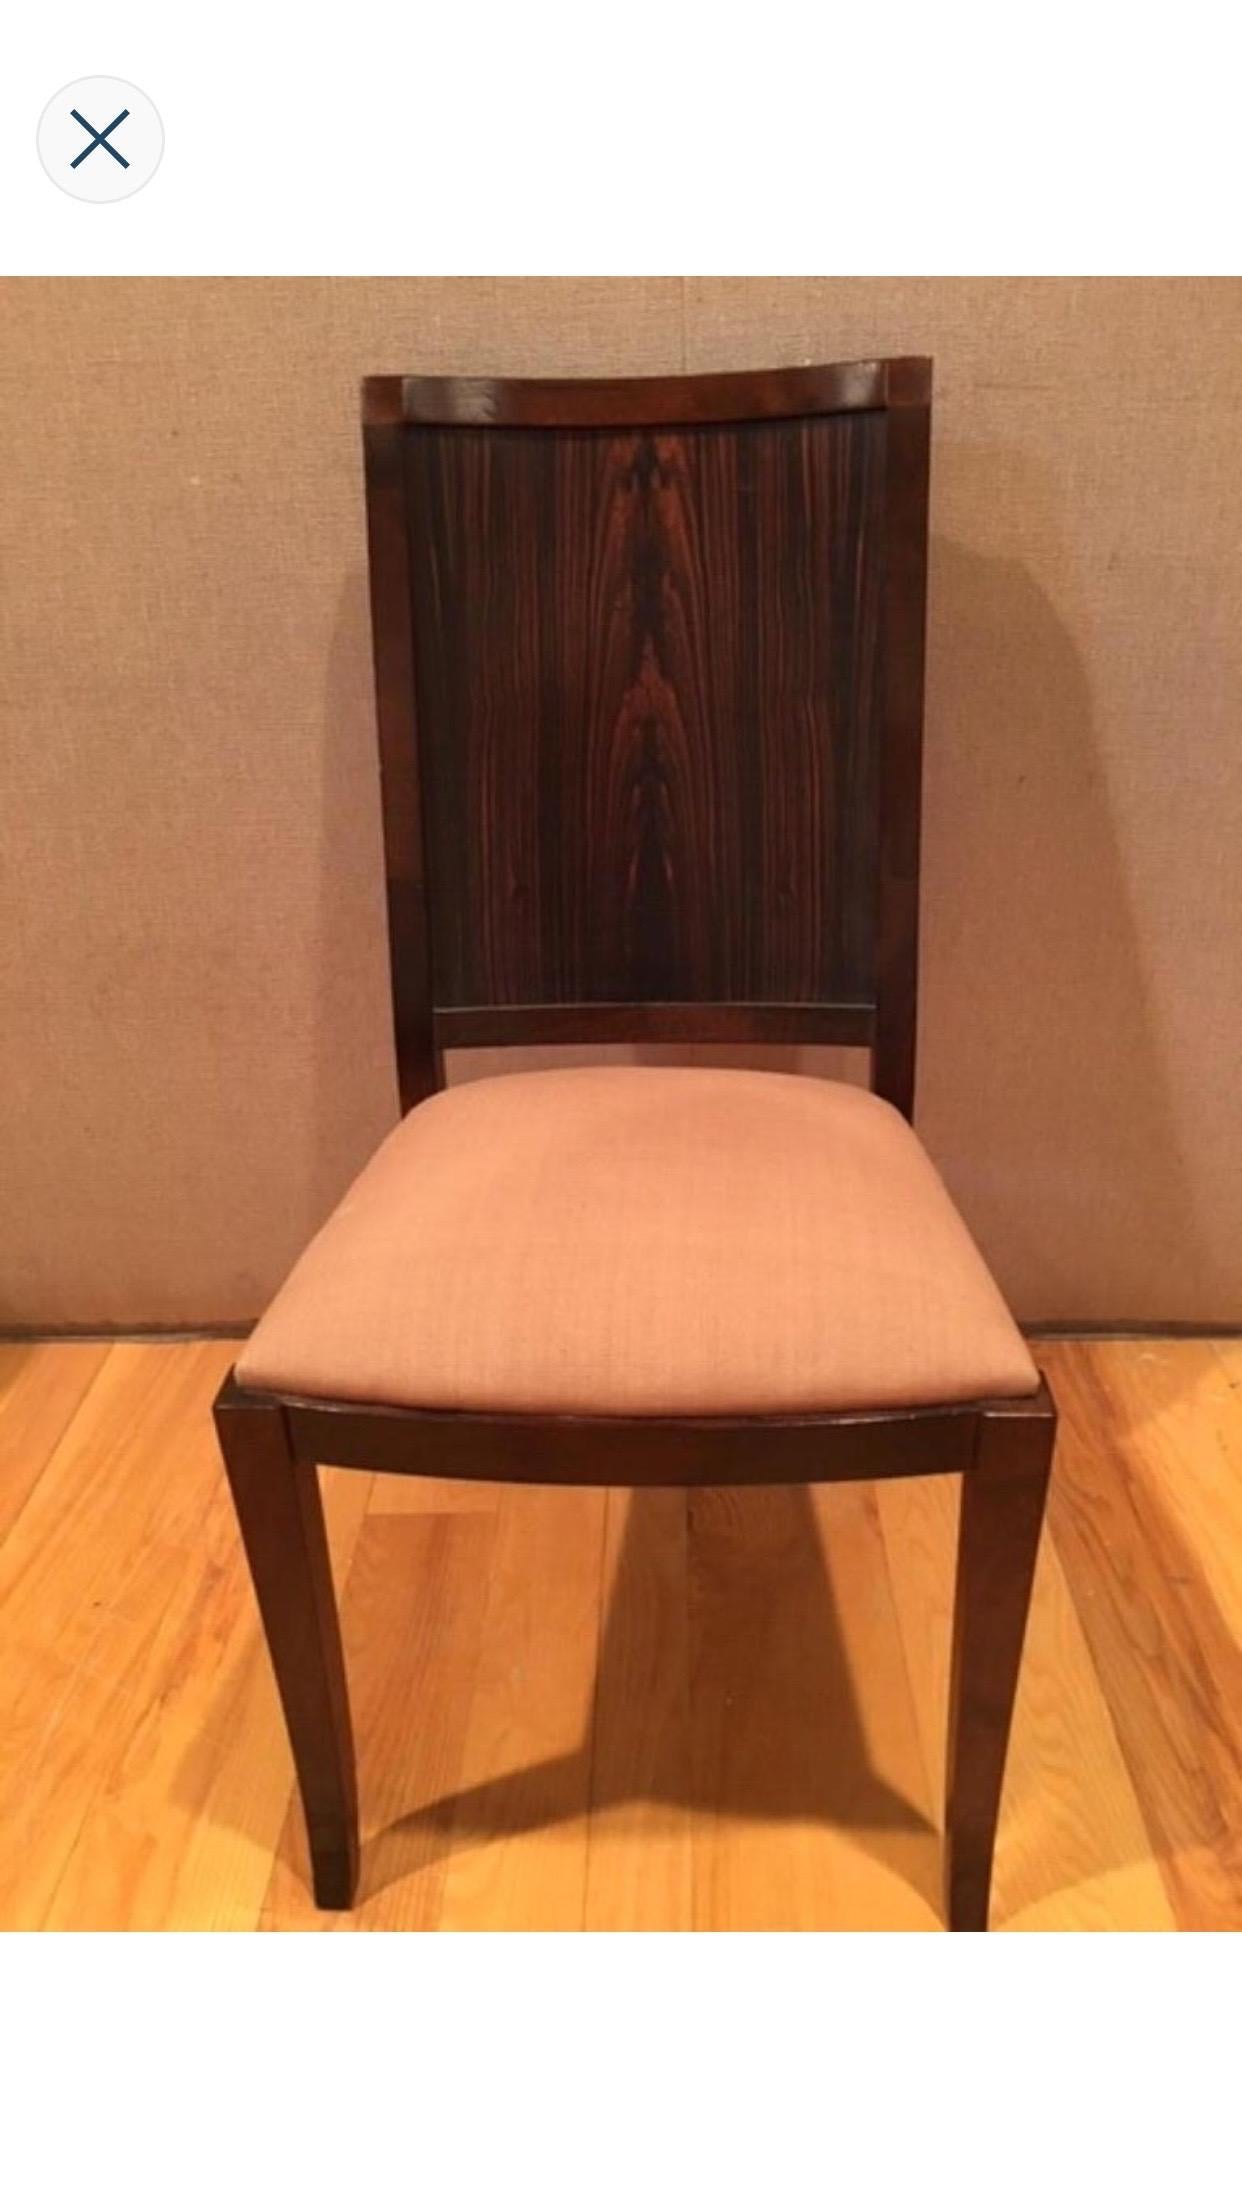 Woodwork Macassar Ebony and Walnut Dining Chairs For Sale